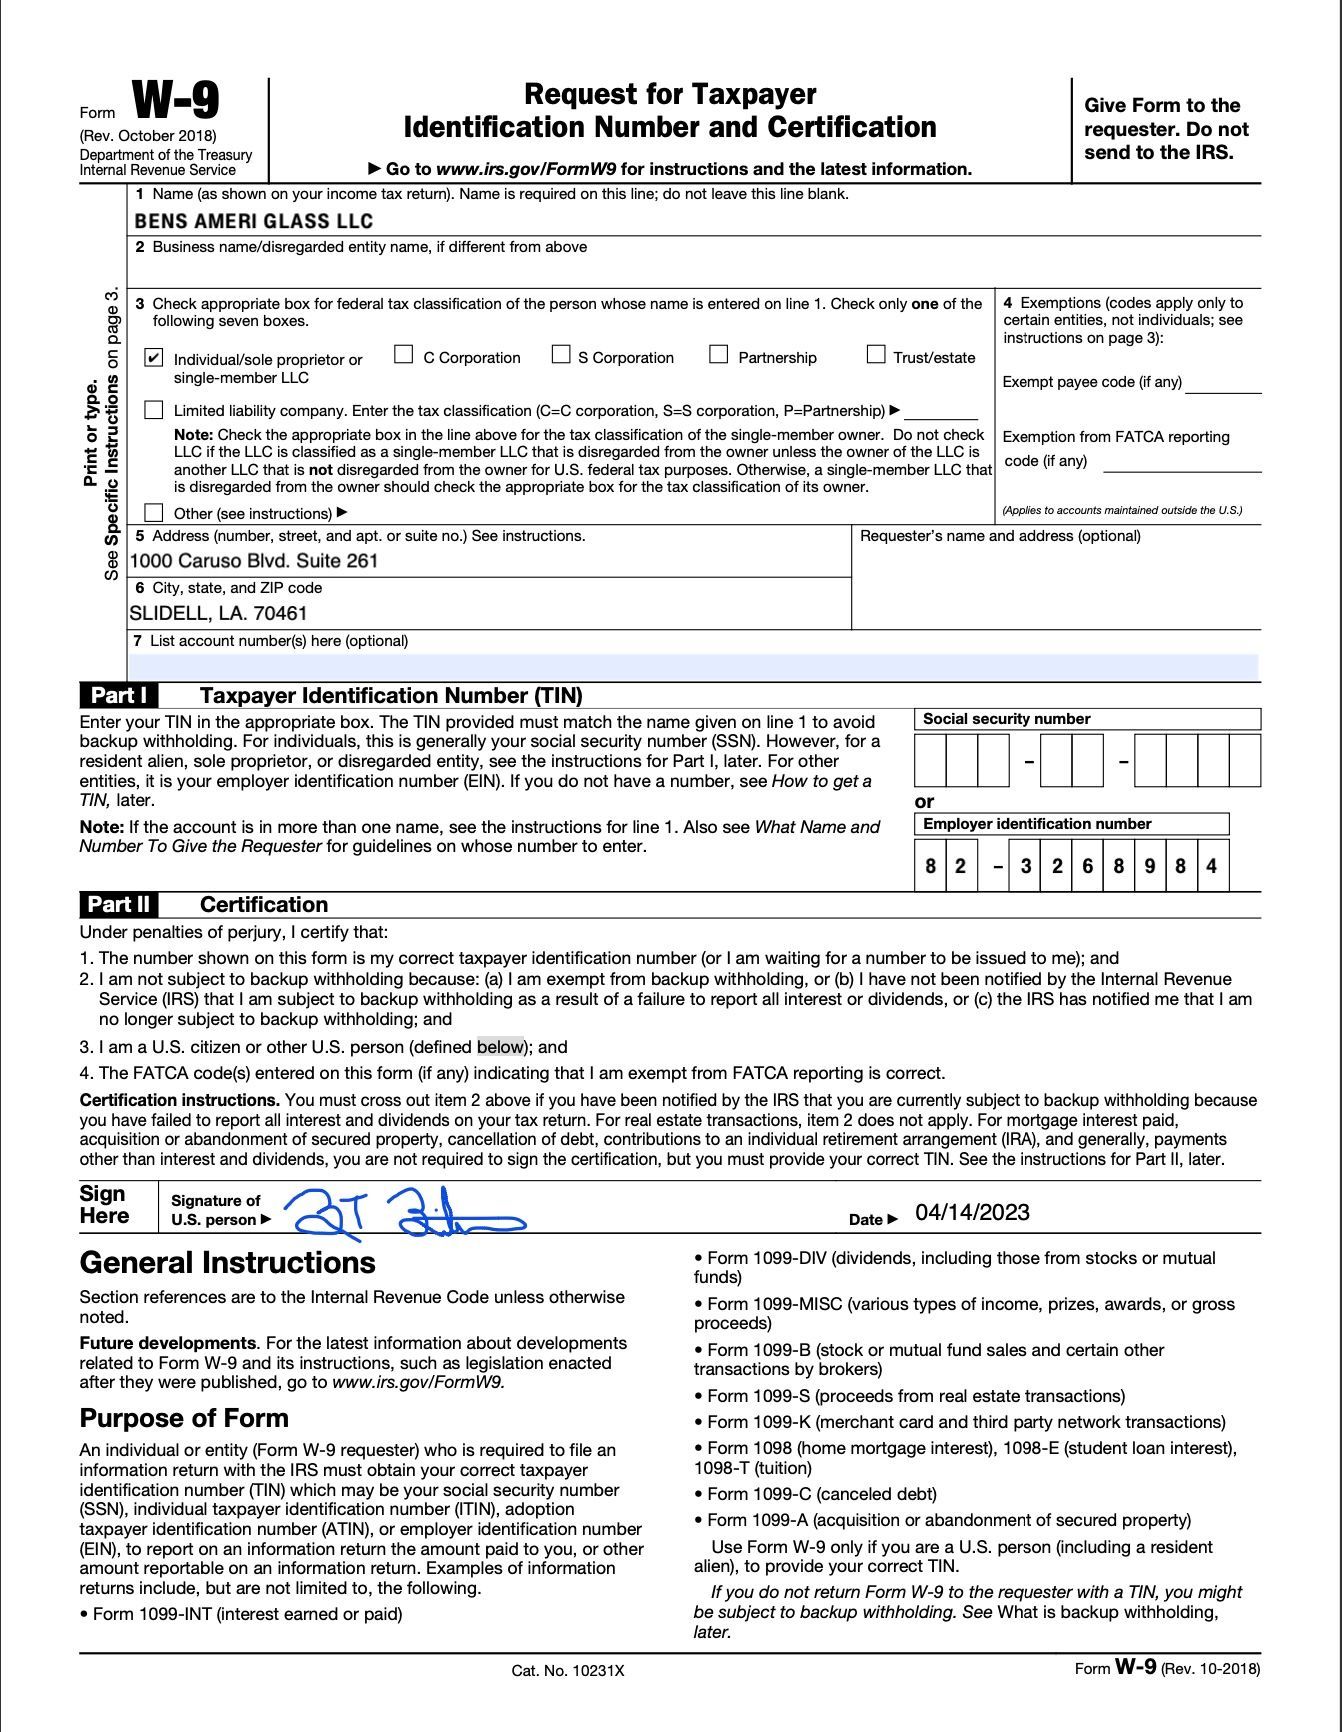 Request for taxpayer identification number and certification form